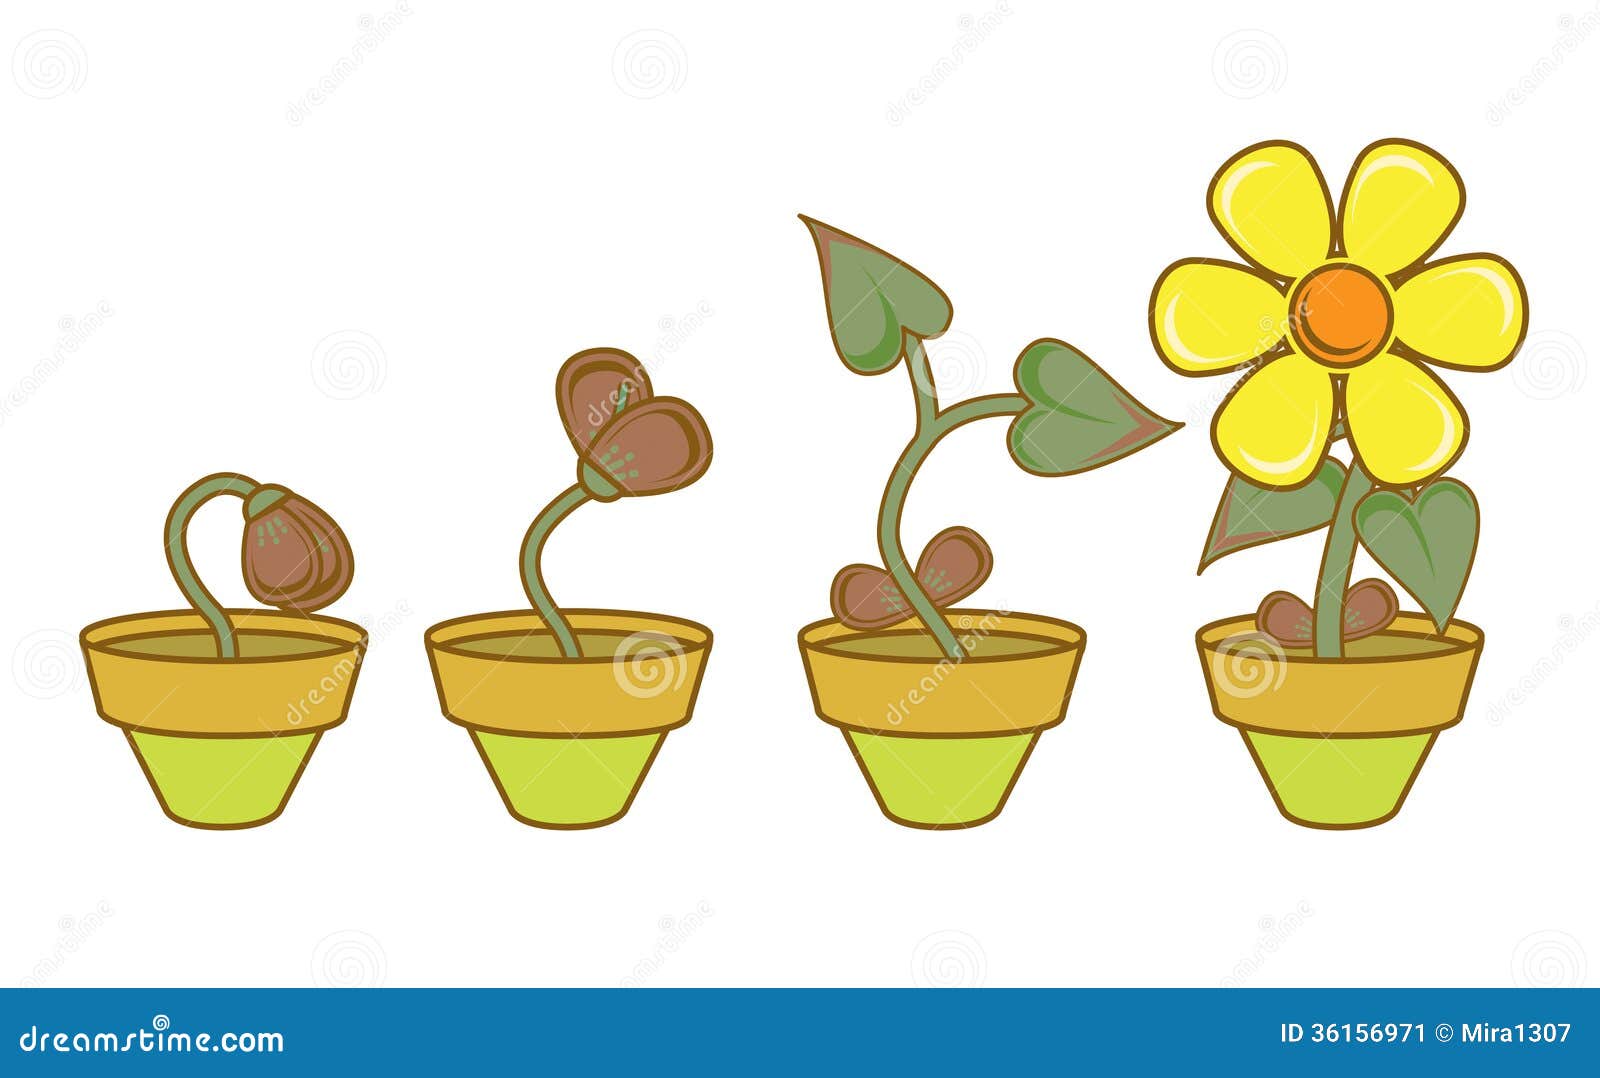 flower growing clipart - photo #16